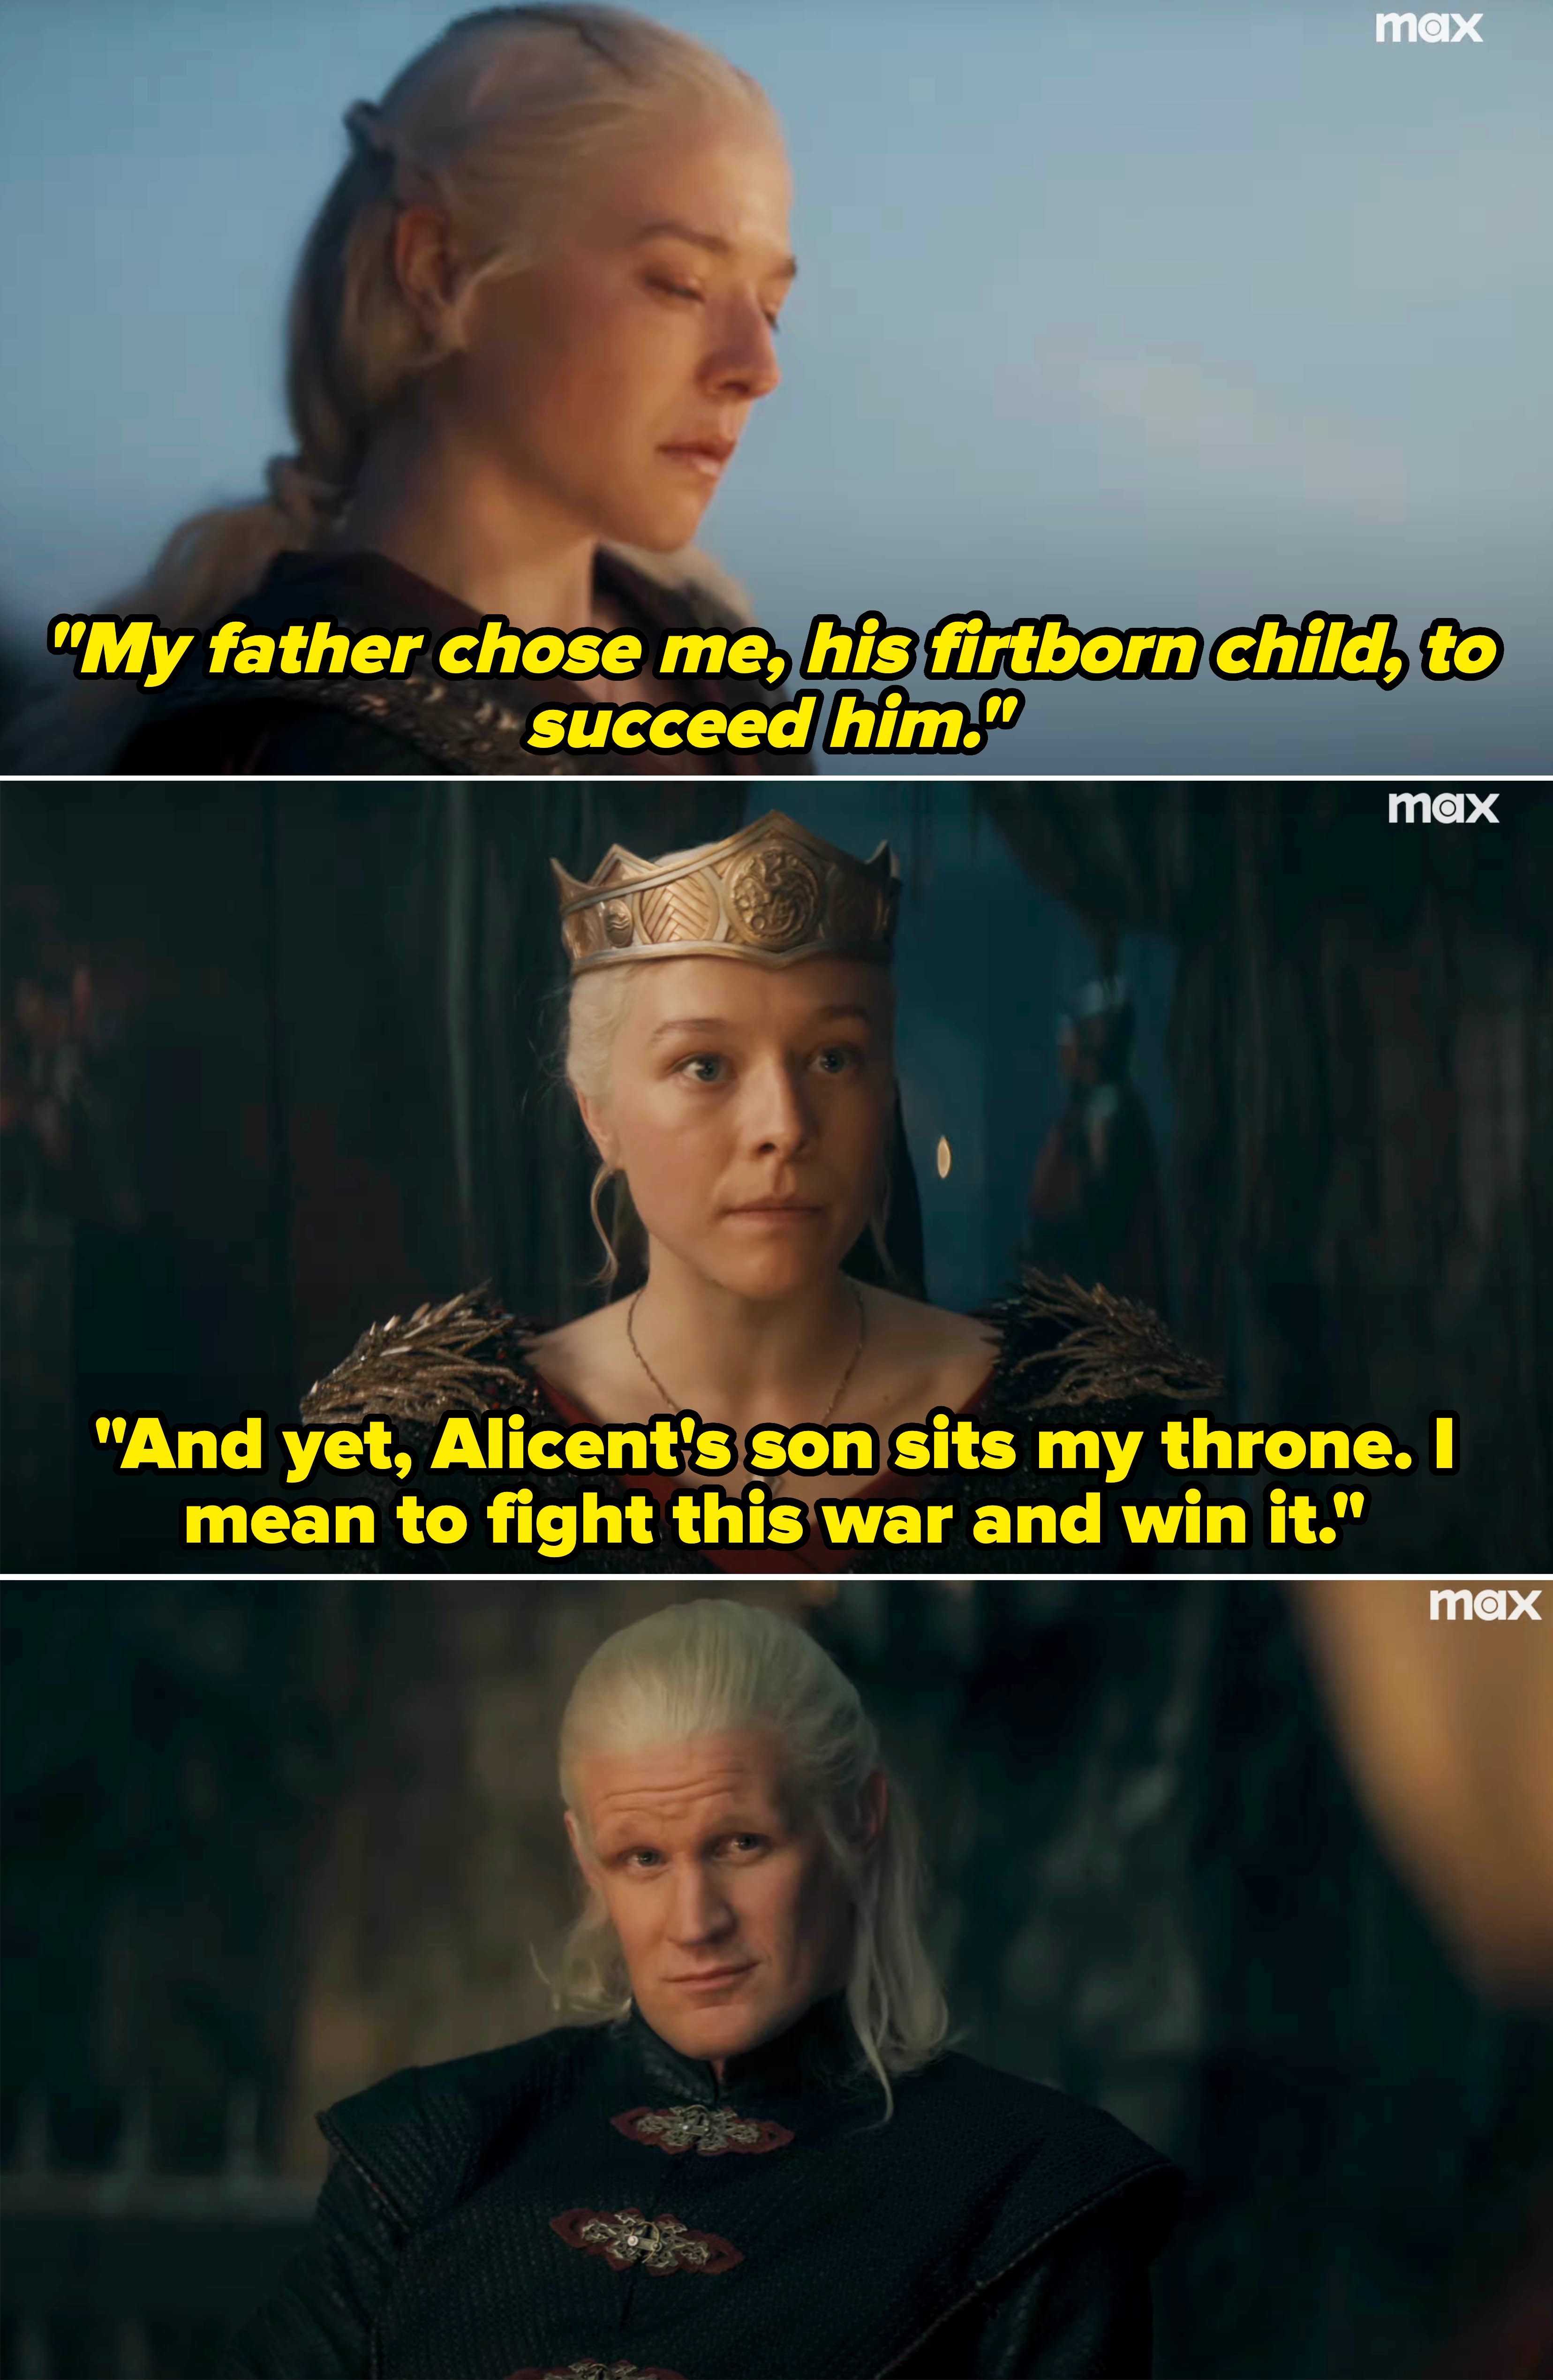 Rhaenyra saying that Alicent&#x27;s son sits on her throne, but she intends to fight and win the war